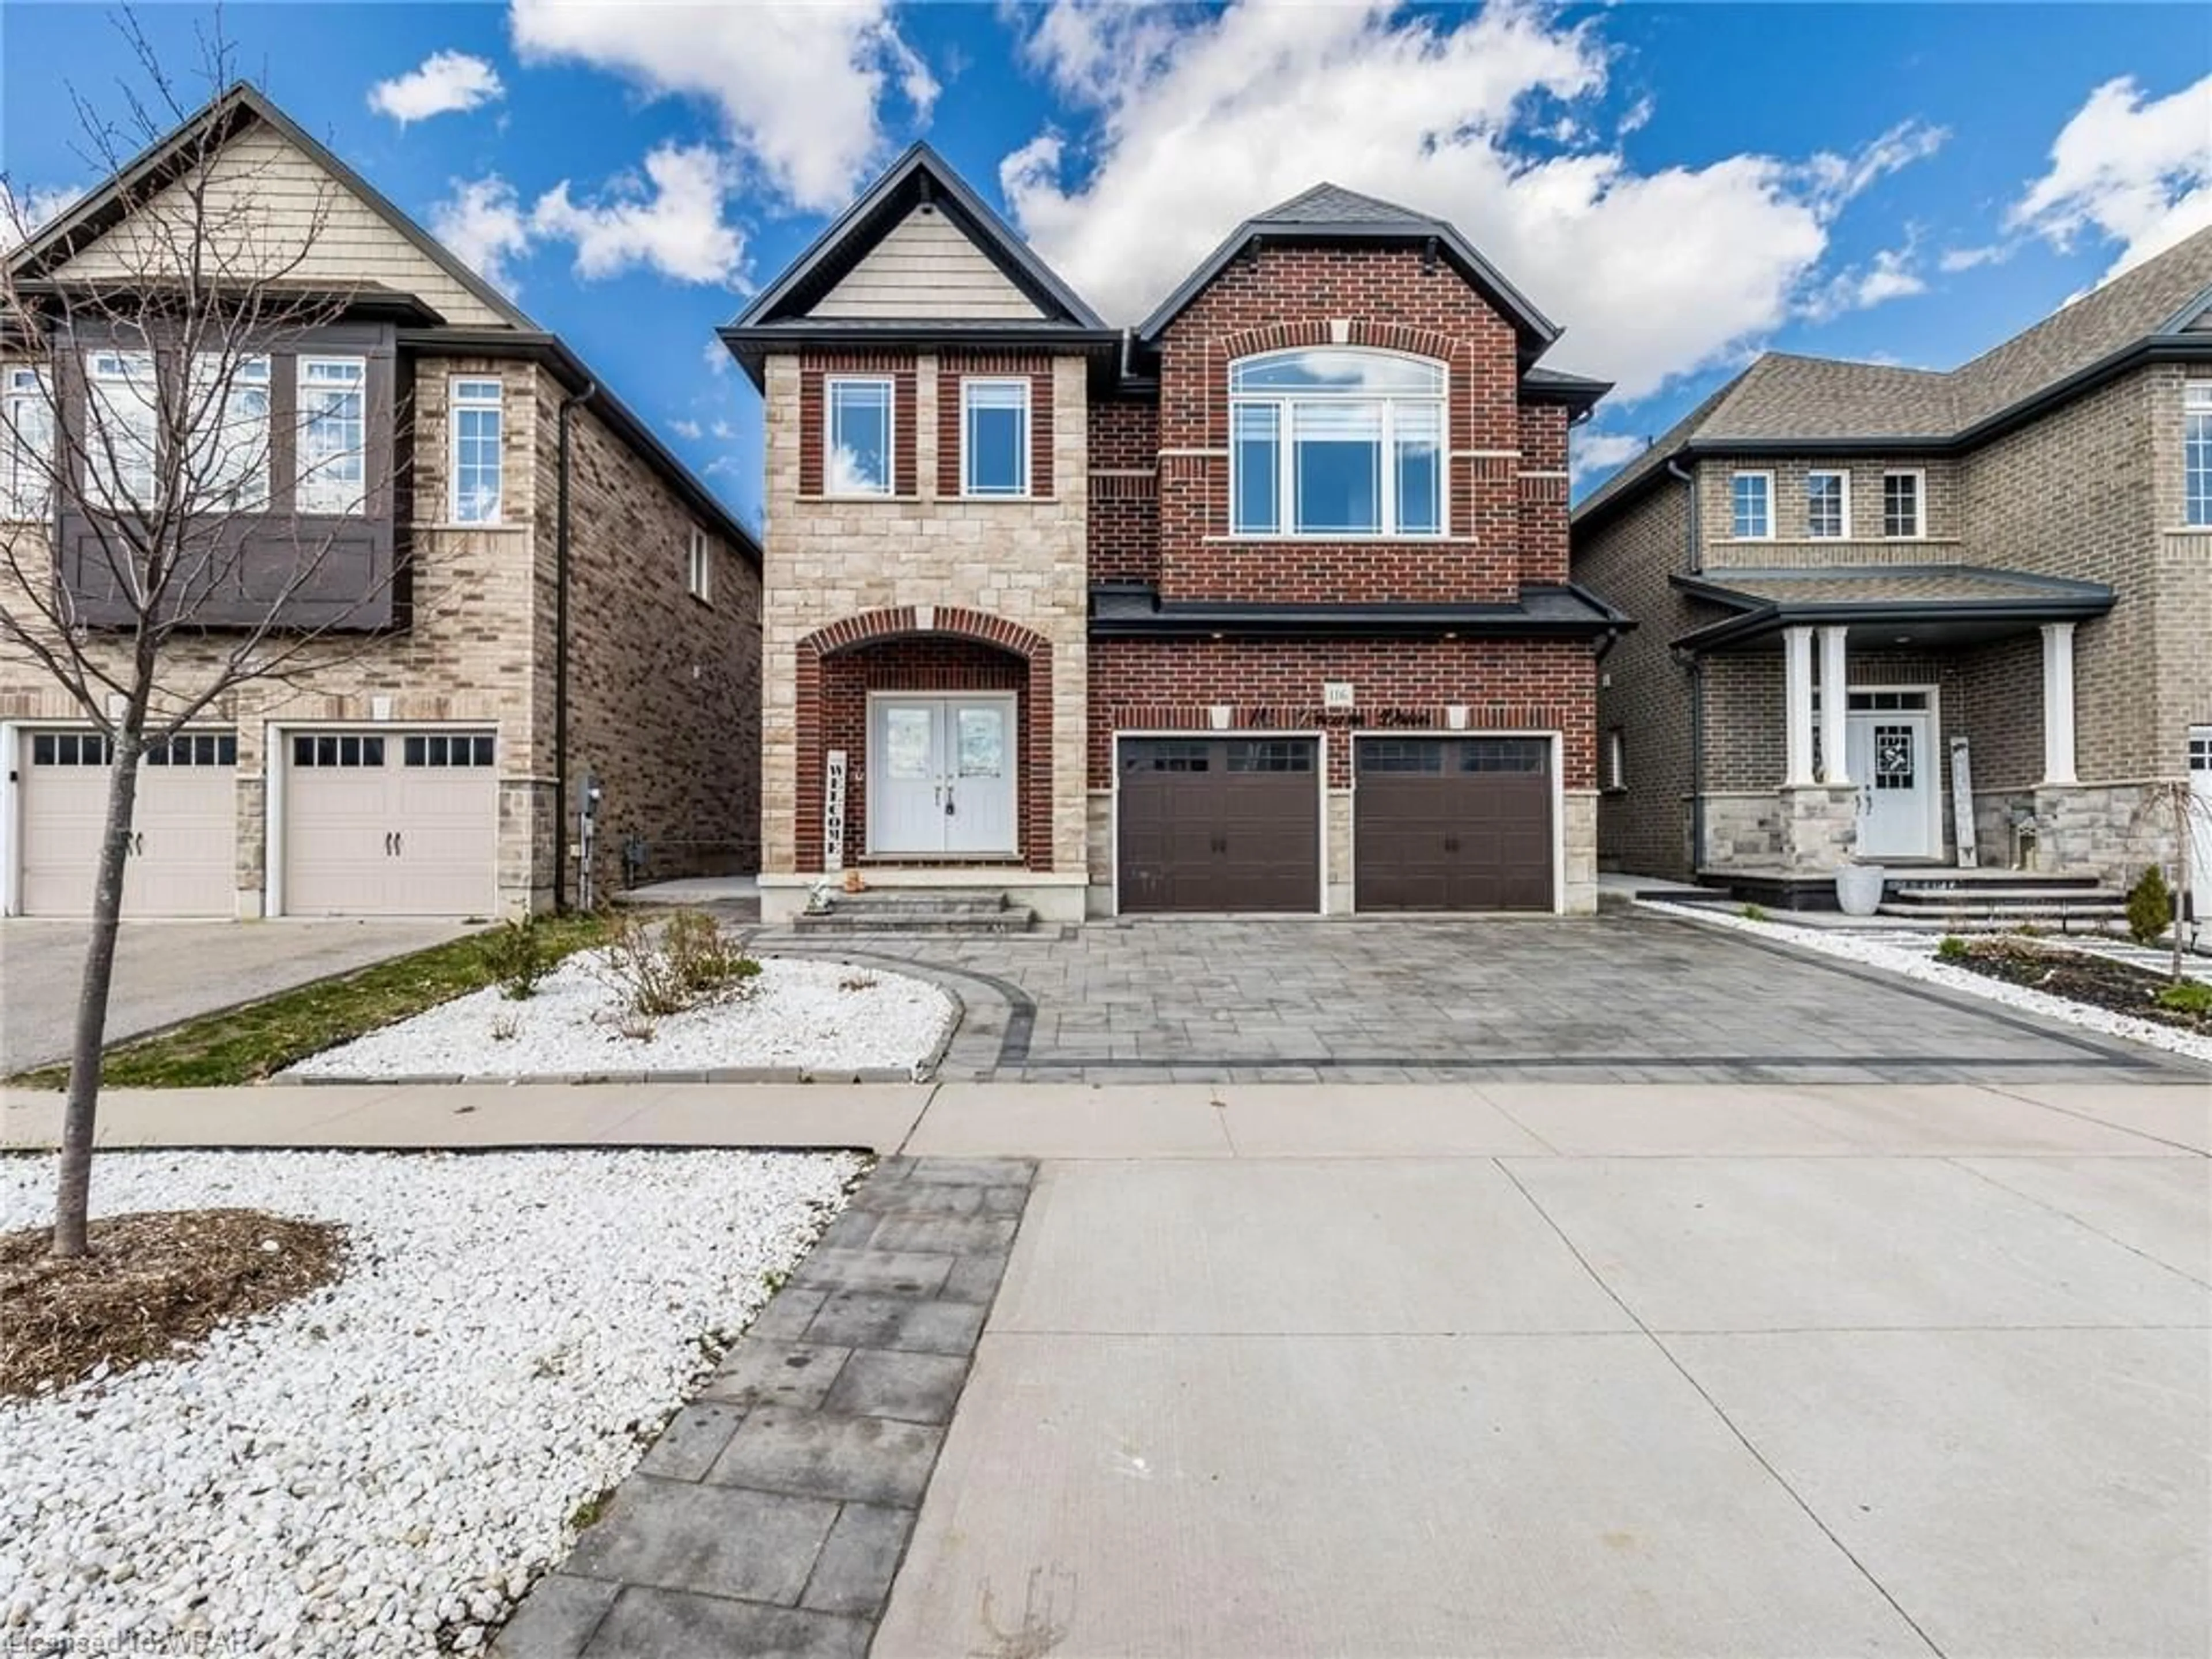 Home with brick exterior material for 116 Freure Dr, Cambridge Ontario N1S 0B4